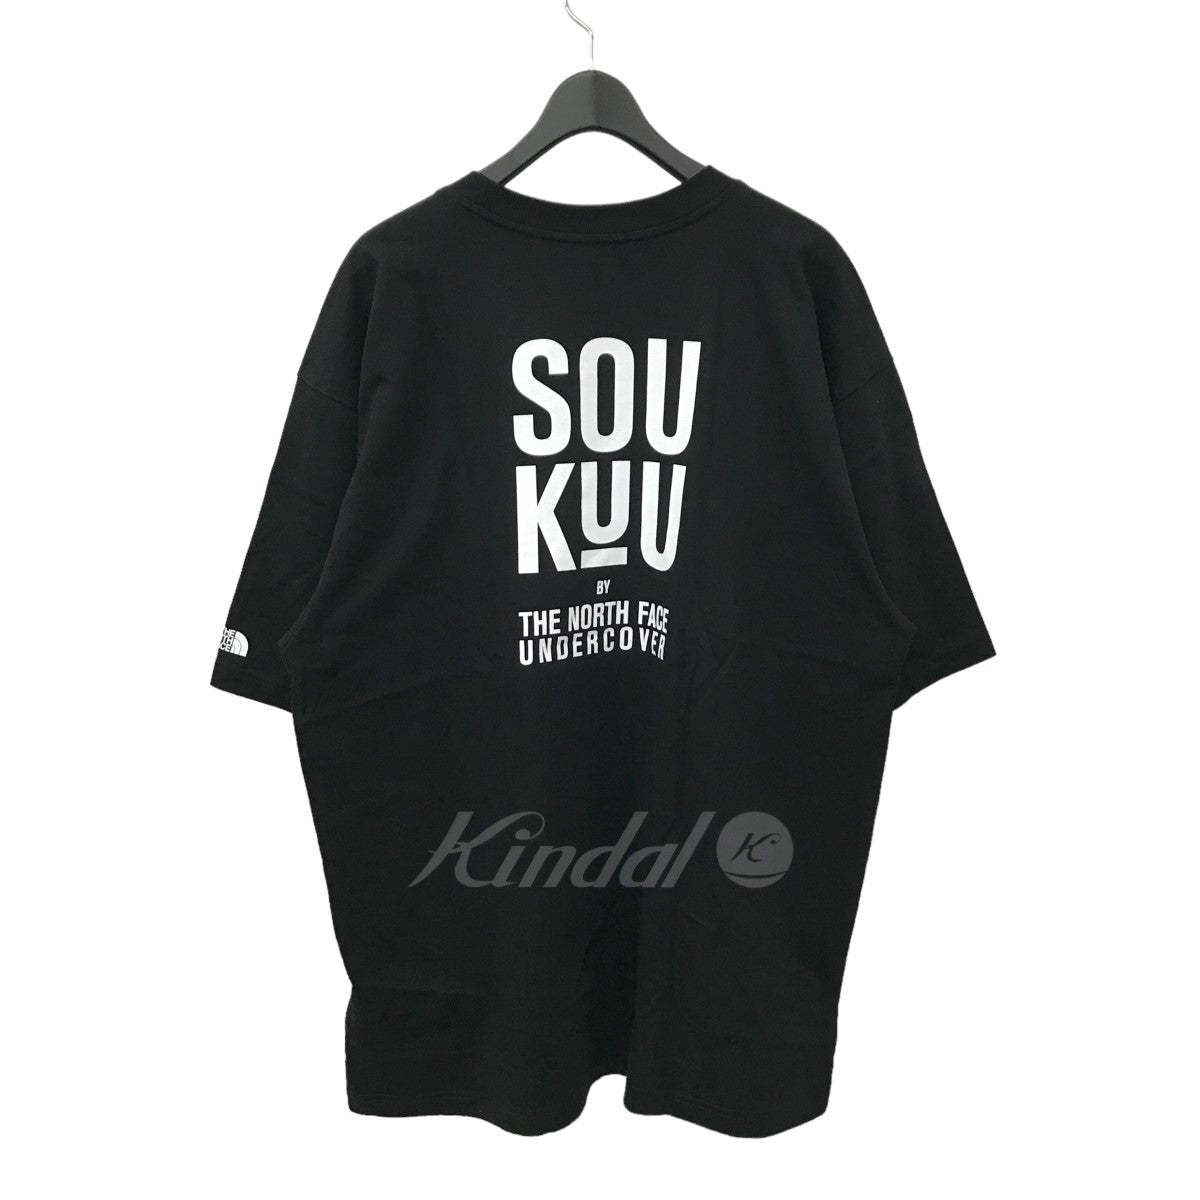 THE NORTH FACE×UNDERCOVER SOUKUU GRAPHIC S／S T-SHIRT プリントT 